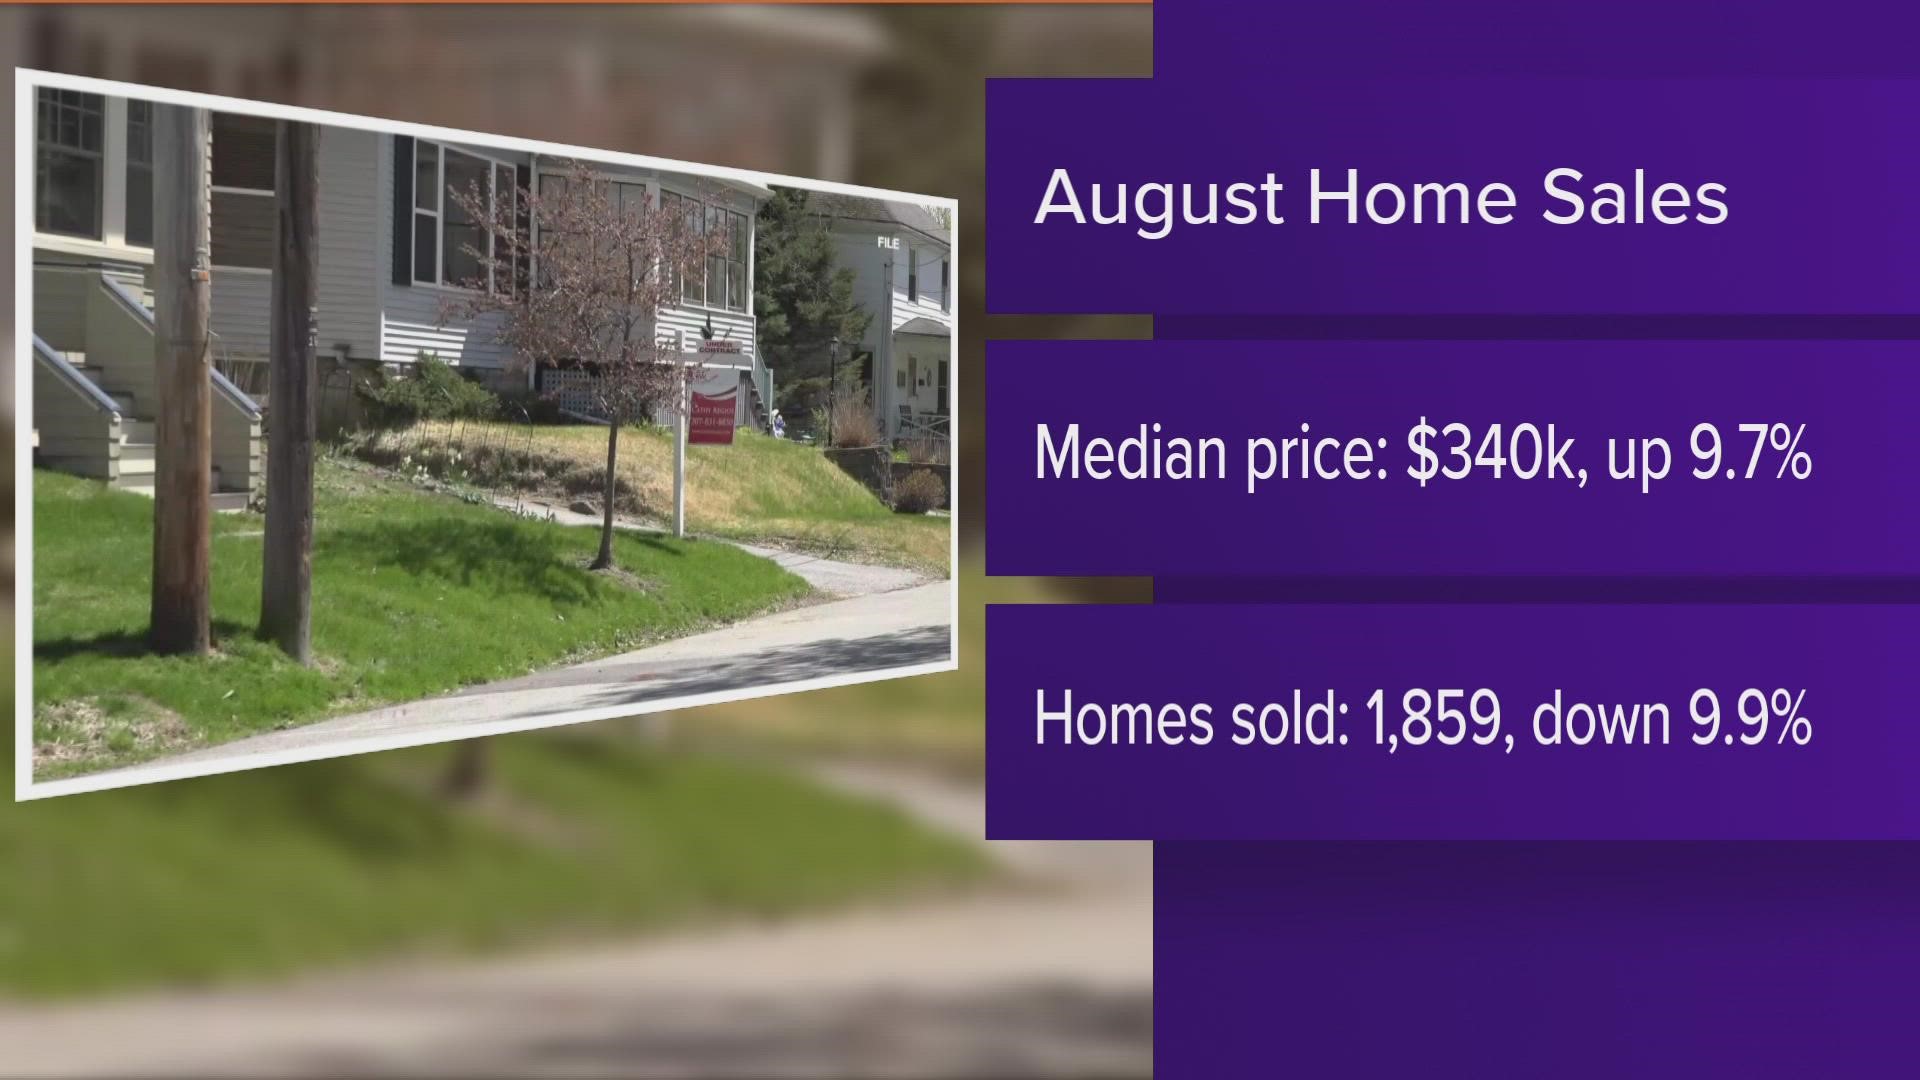 Maine home sales dropped nearly 10 percent during the same period.